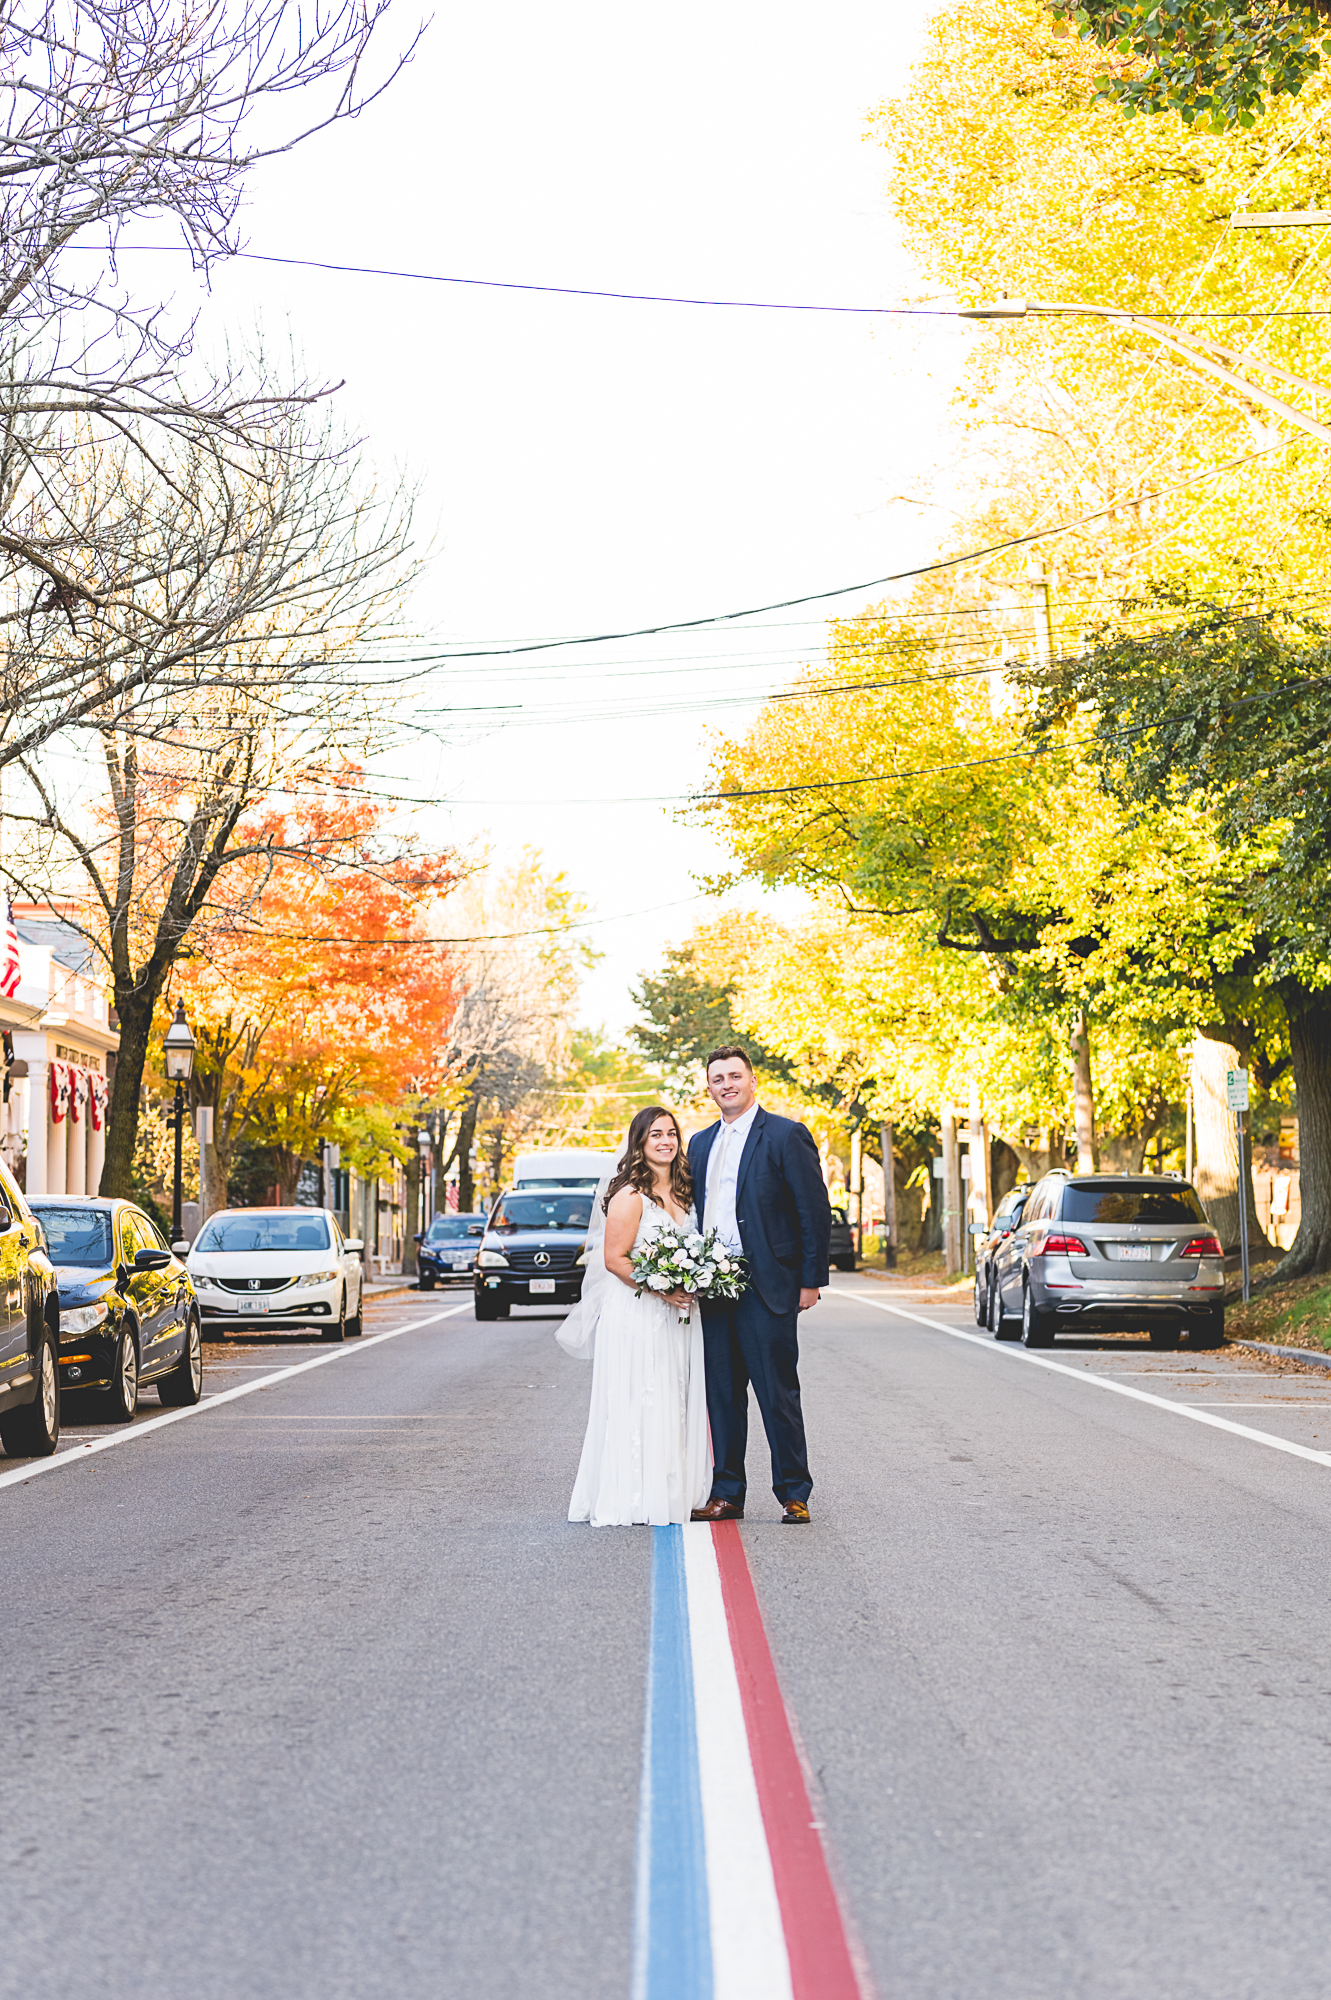 Wedding in Bristol RI. Bride and groom standing on Fourth of July parade route lines.